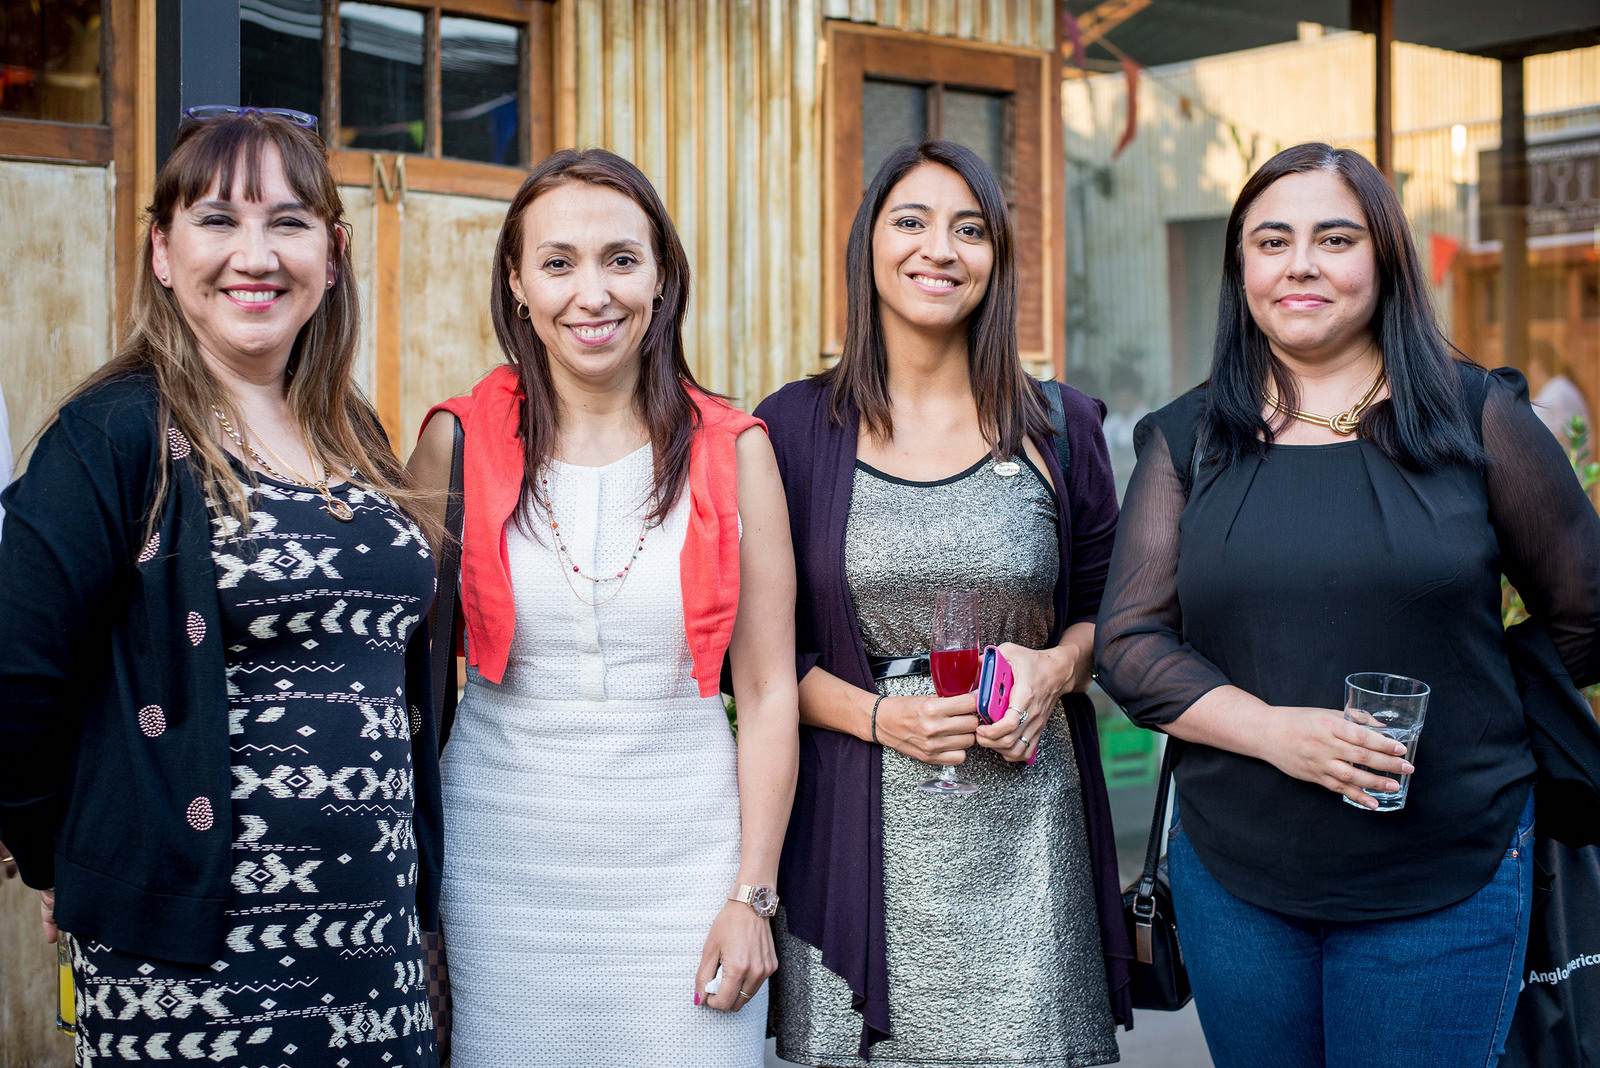 (From left to right) Aileen Carcamo, Head of Direcon Communications; Paulina Nazal, General Director of Direcon; Natalia Sepulveda, Head of the Studies and Marketing Department of Asprocer; and, Denisse Vasquez, Journalist from Diario Financiero (local newspaper).
